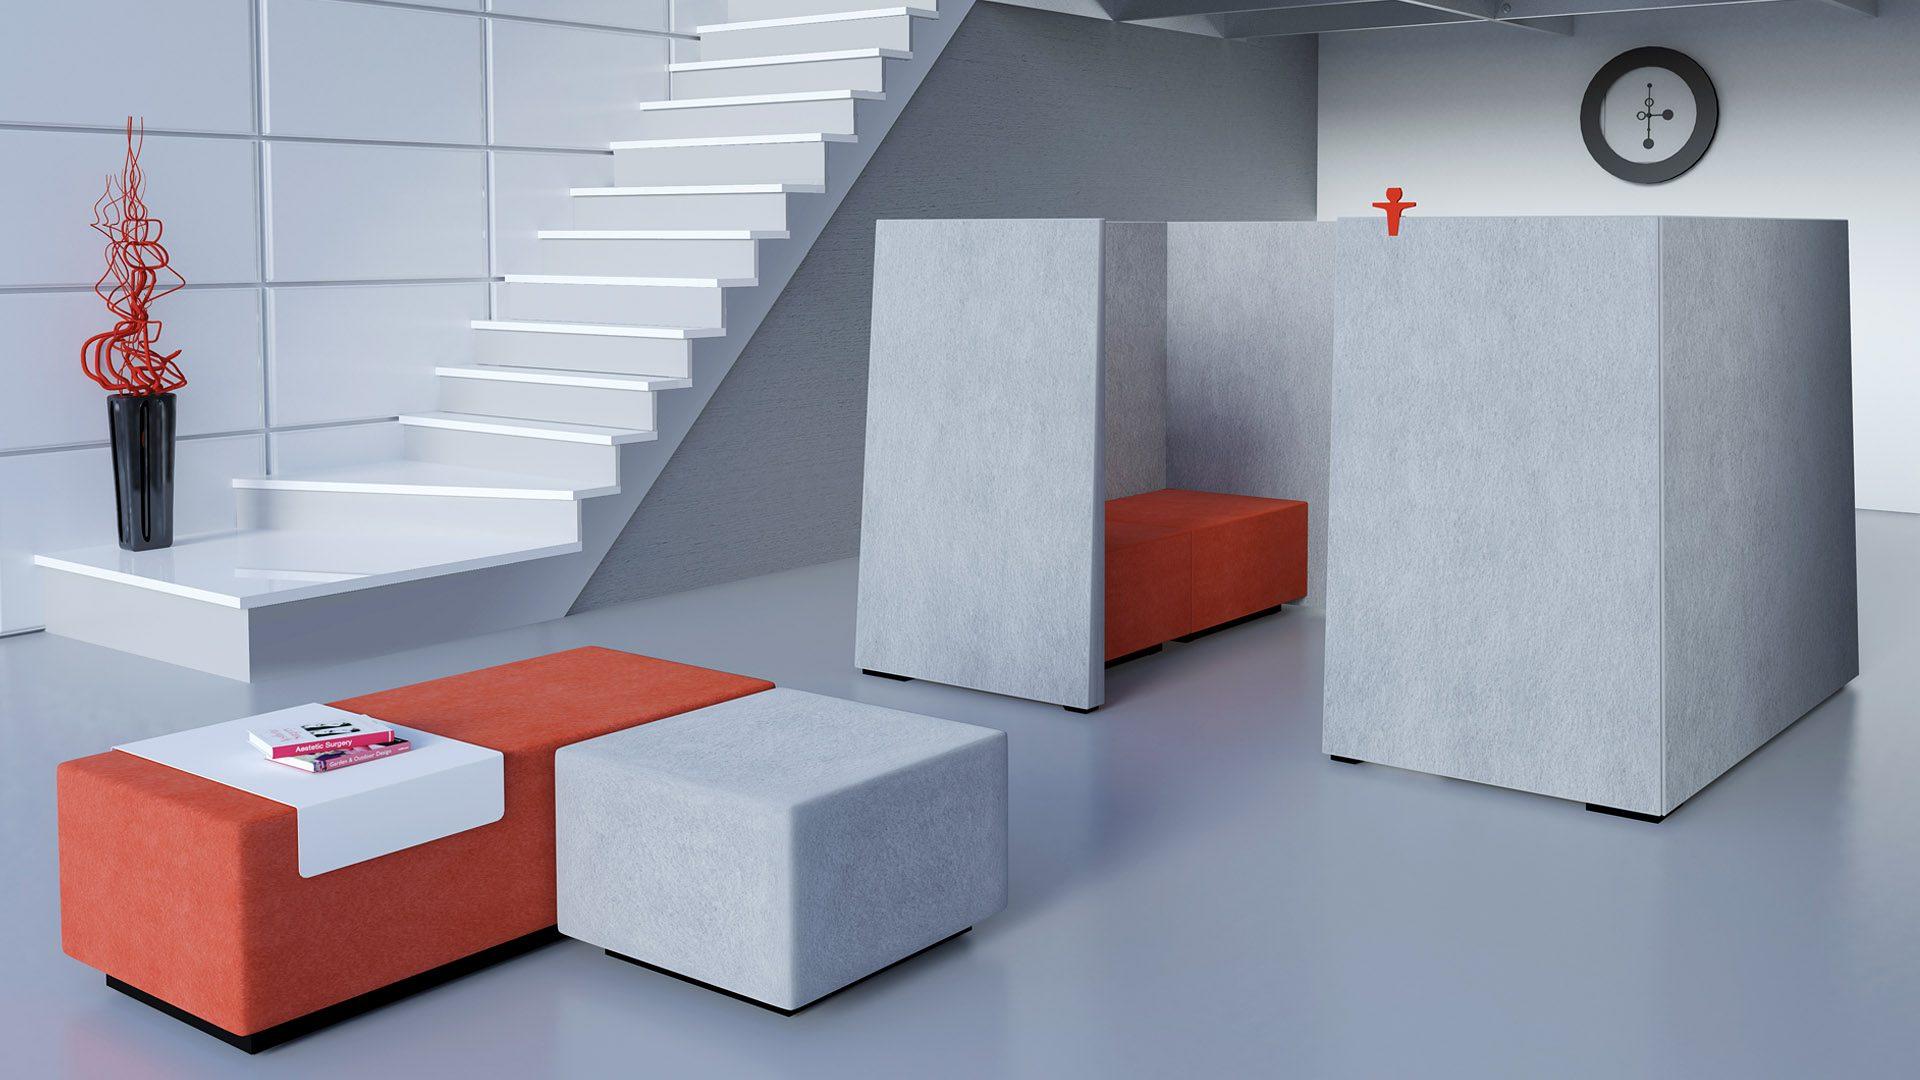 Jazz Silent Box is made of acoustic material which delivers class C sound absorption